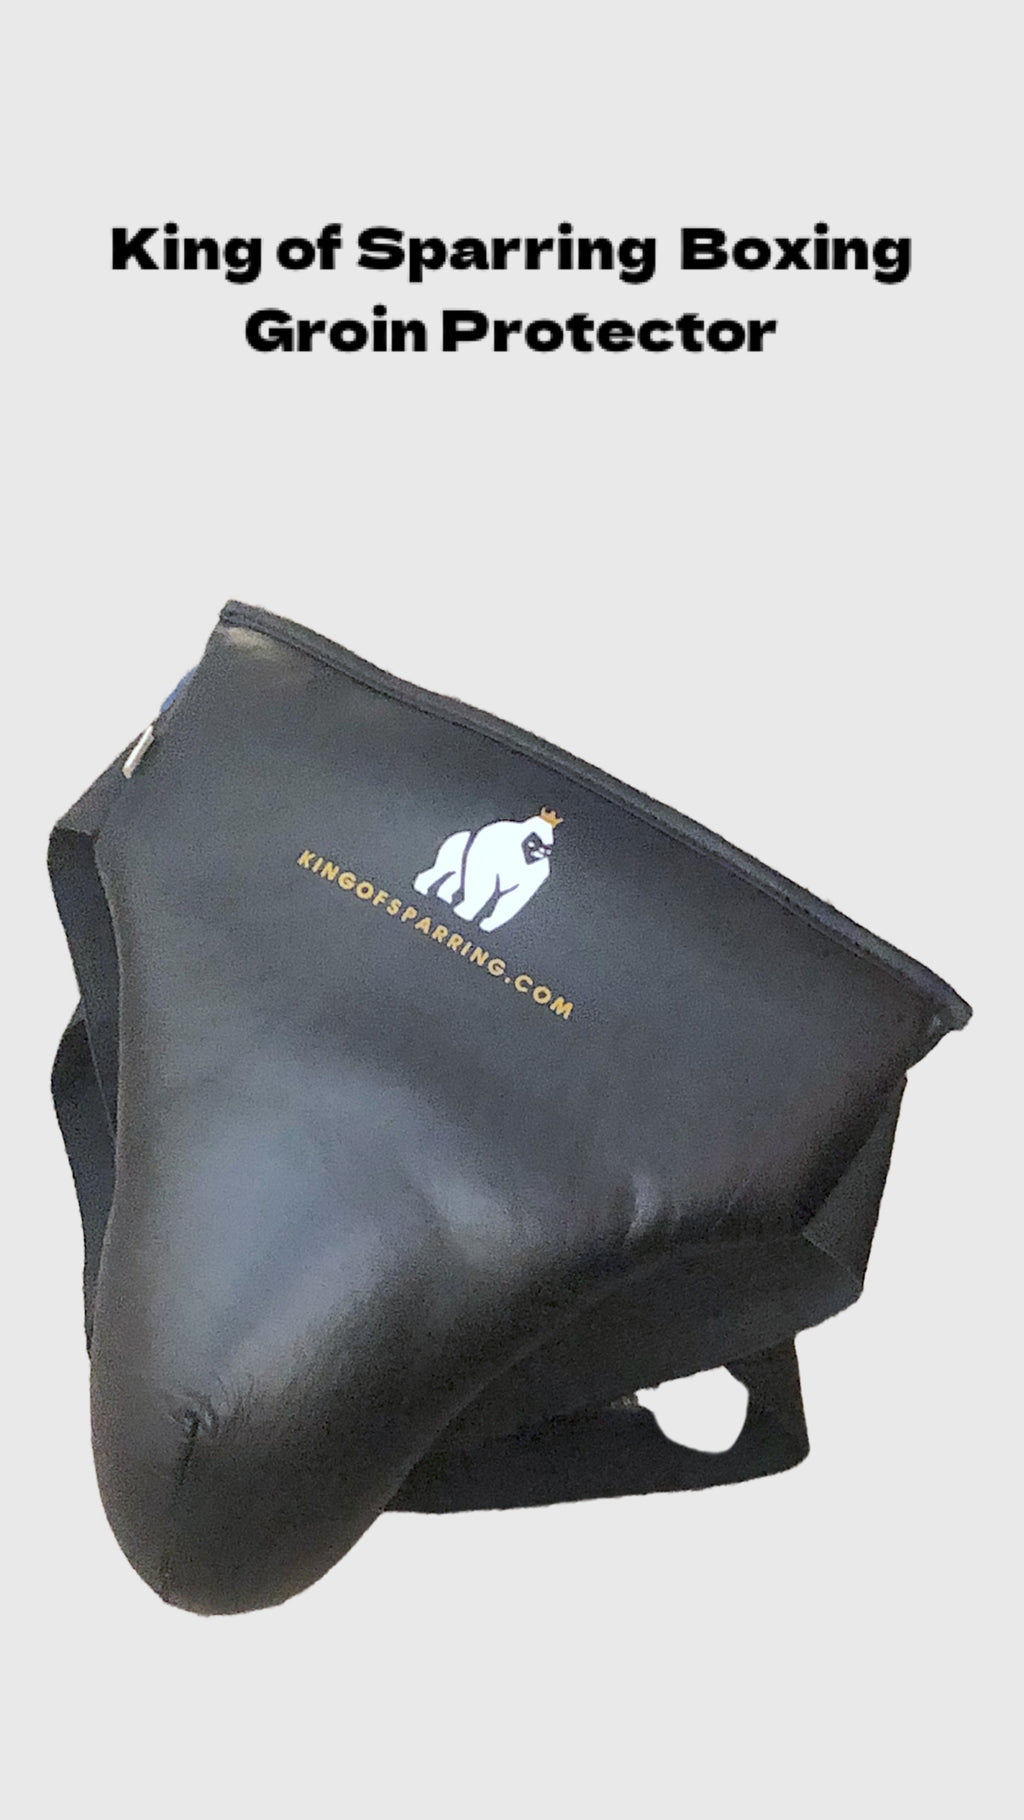 BOXING GROIN PROTECTOR BY KING OF SPARRING